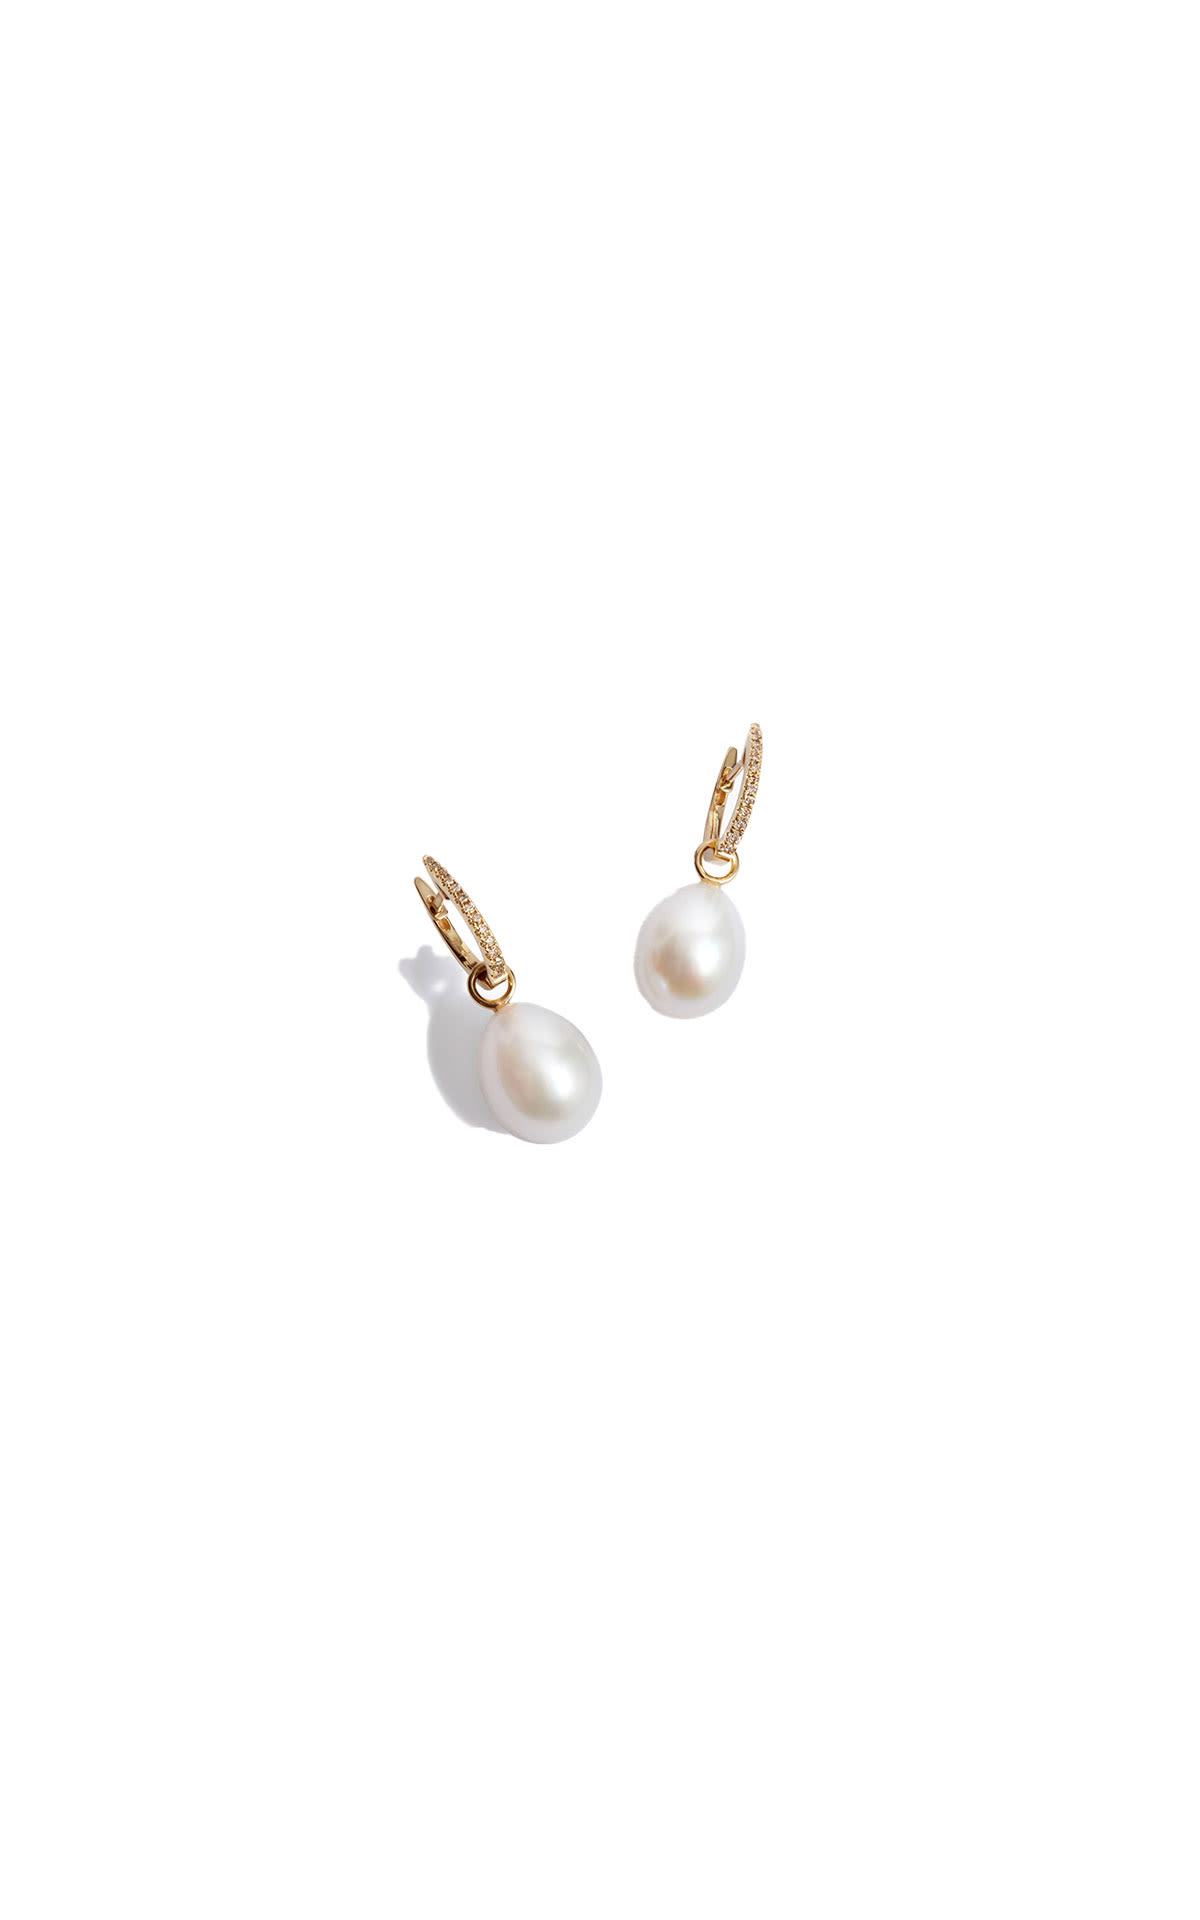 Annoushka 18ct gold and diamond detachable pearl earrings from Bicester Village